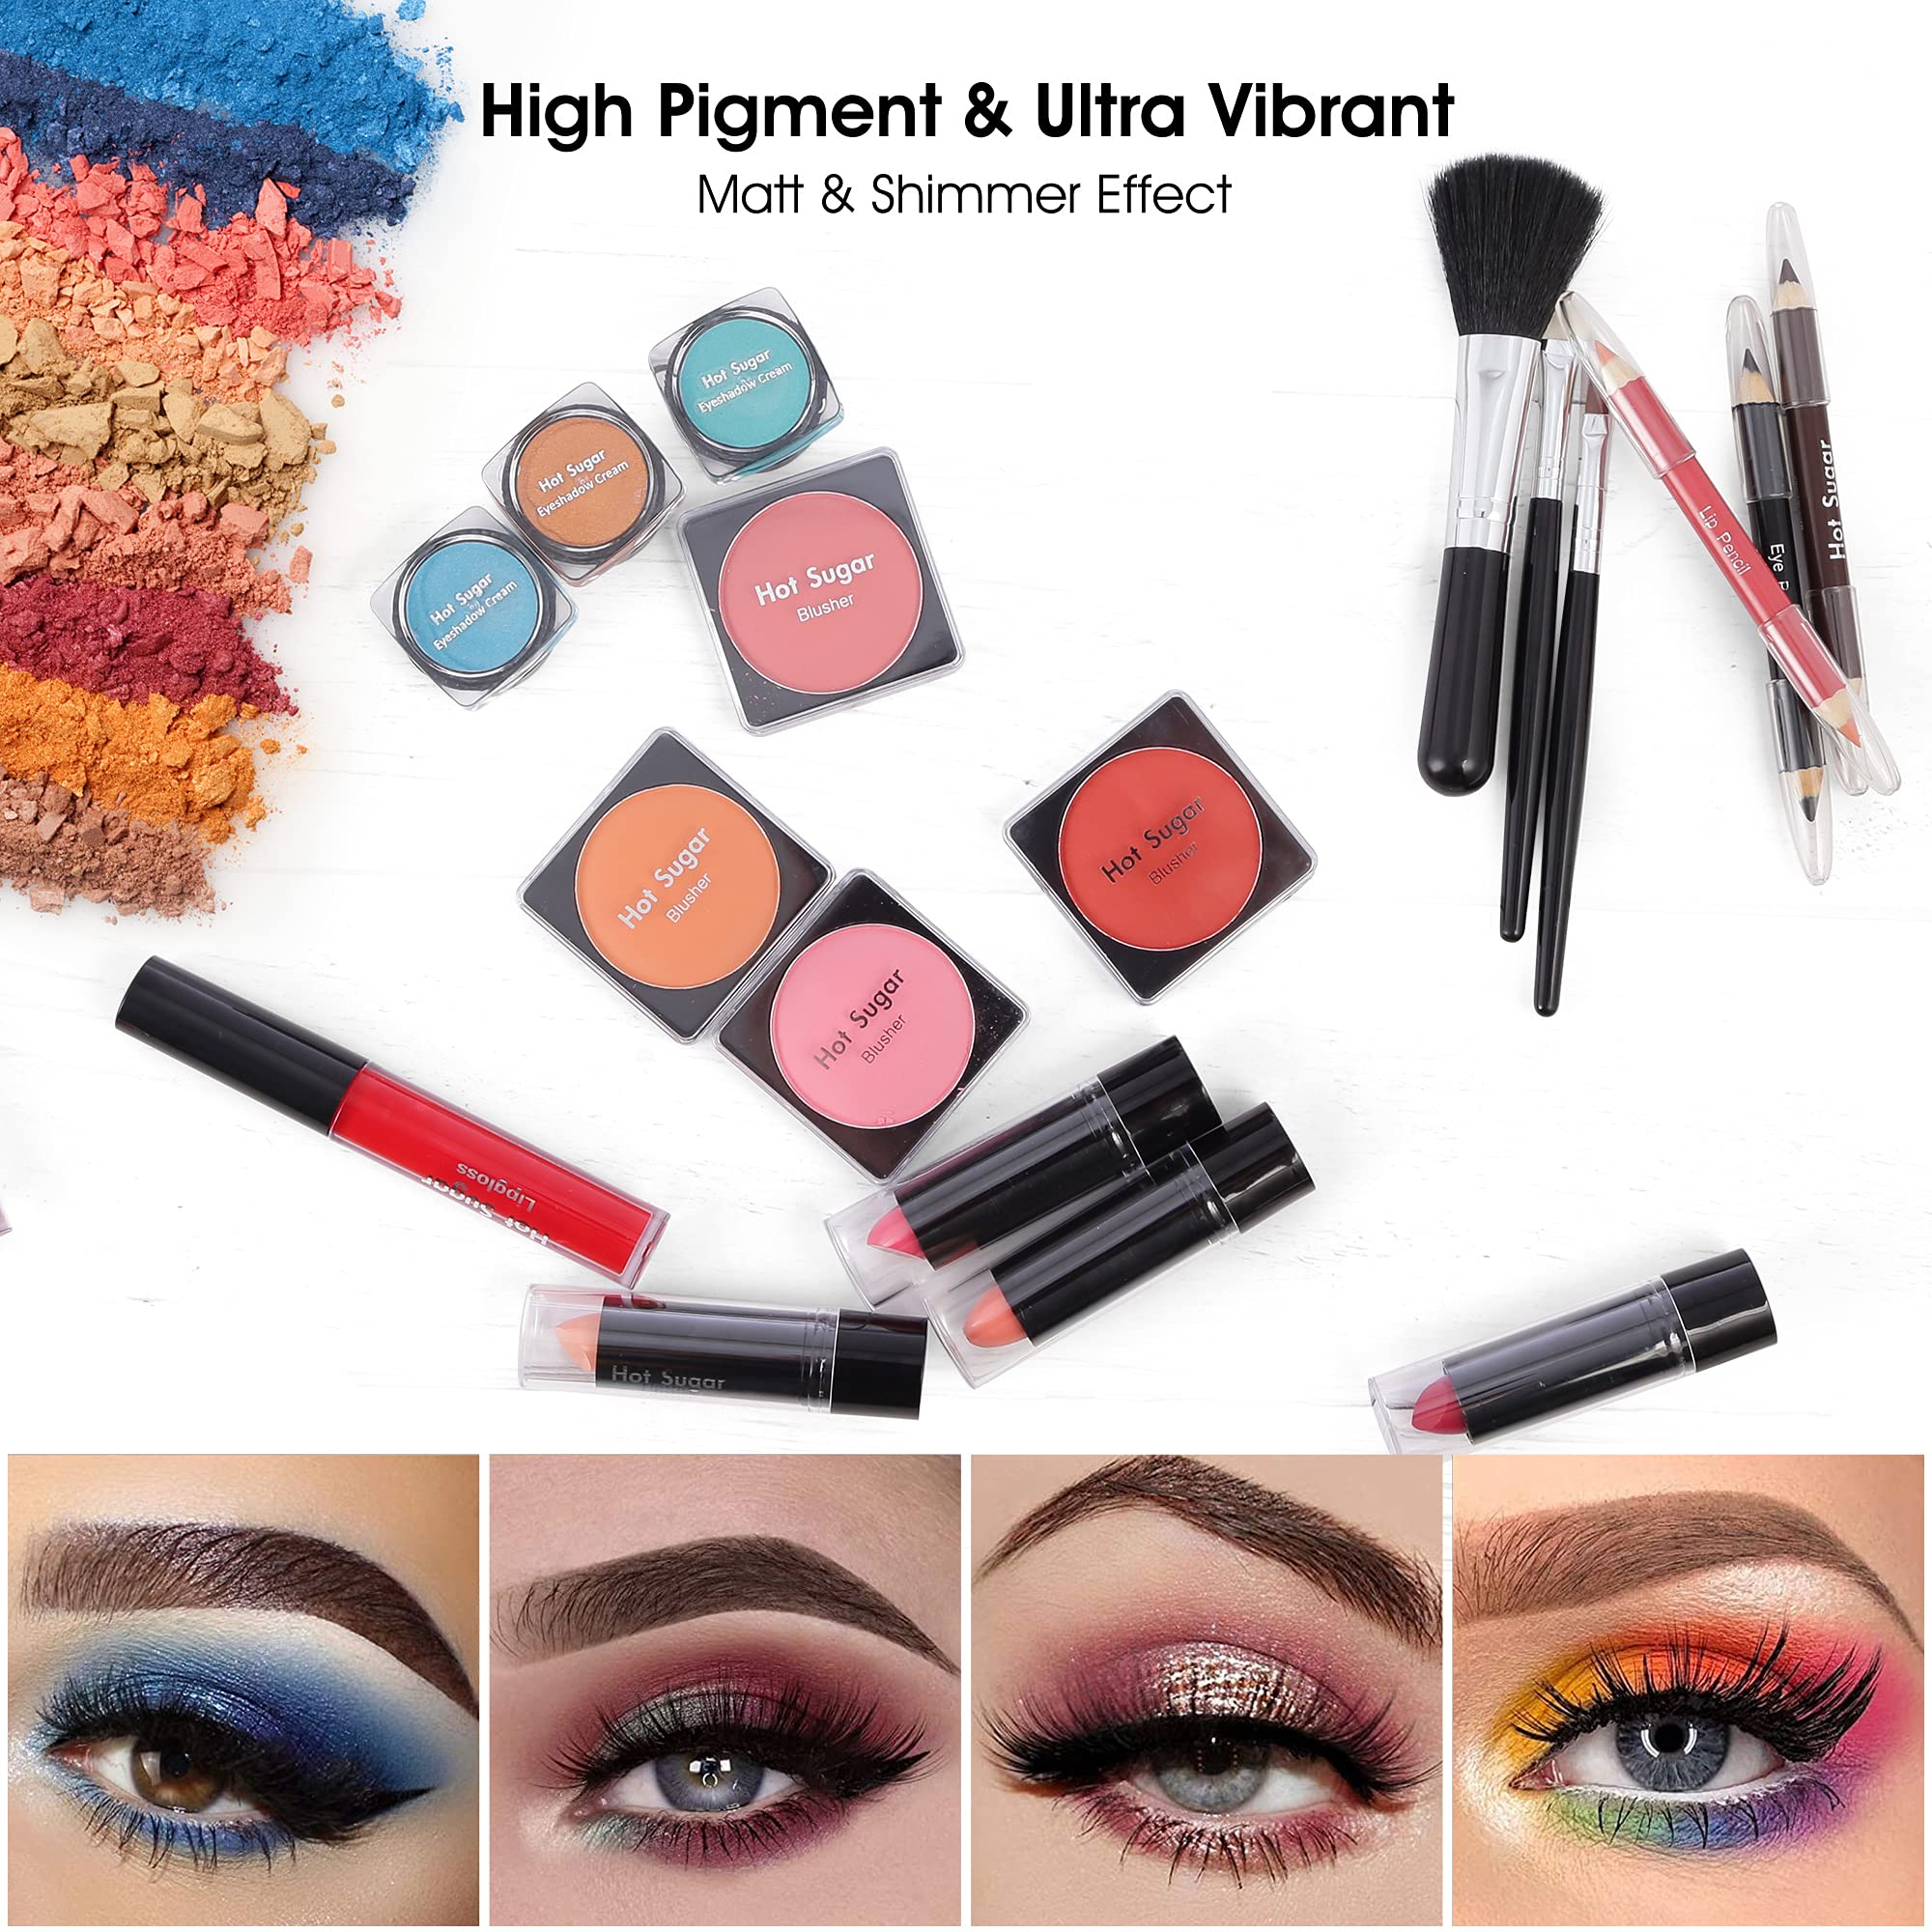 Hot Sugar All In One Makeup Set for Adults and Girls - Full Makeup Kit for Beginners With Eye Shadow Palette, Blush, Lip Gloss, Brush, Mirror (Pink Leopard)